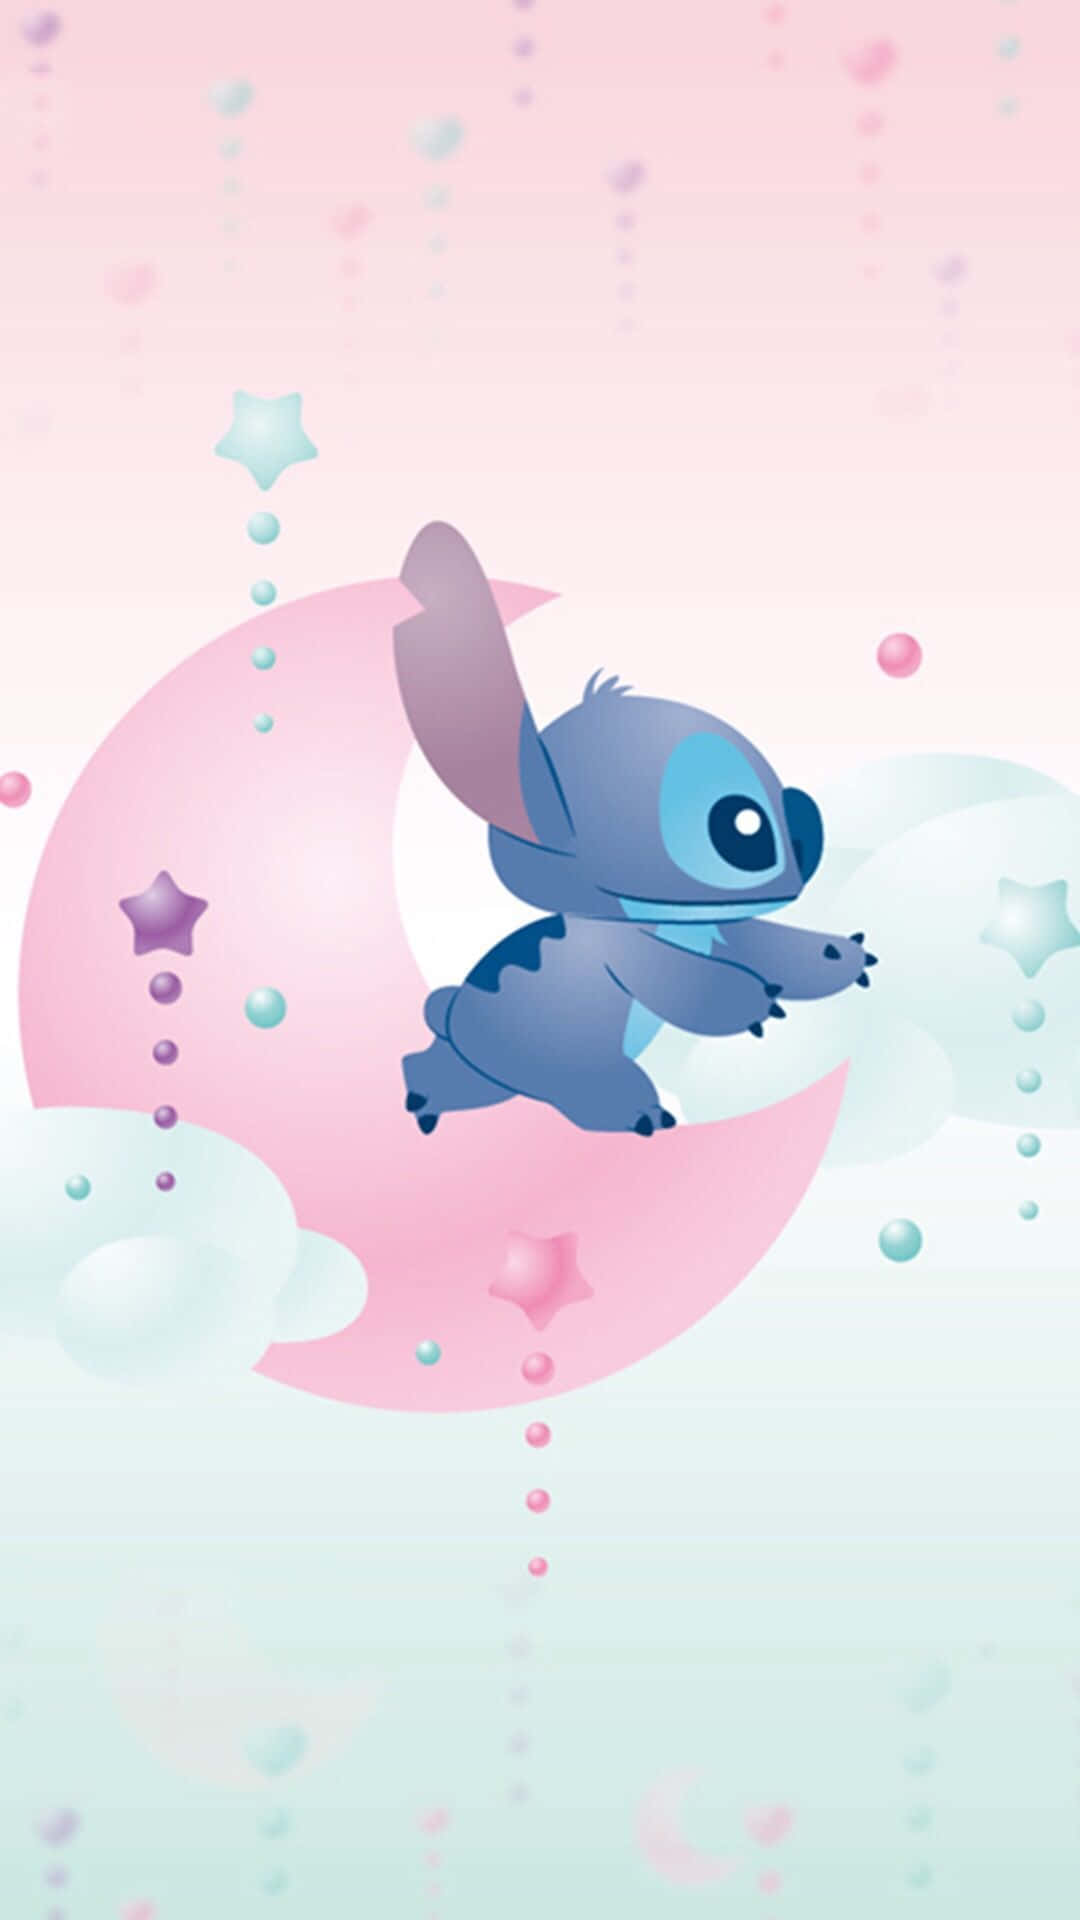 Cute Baby Stitch In Moon Wallpaper